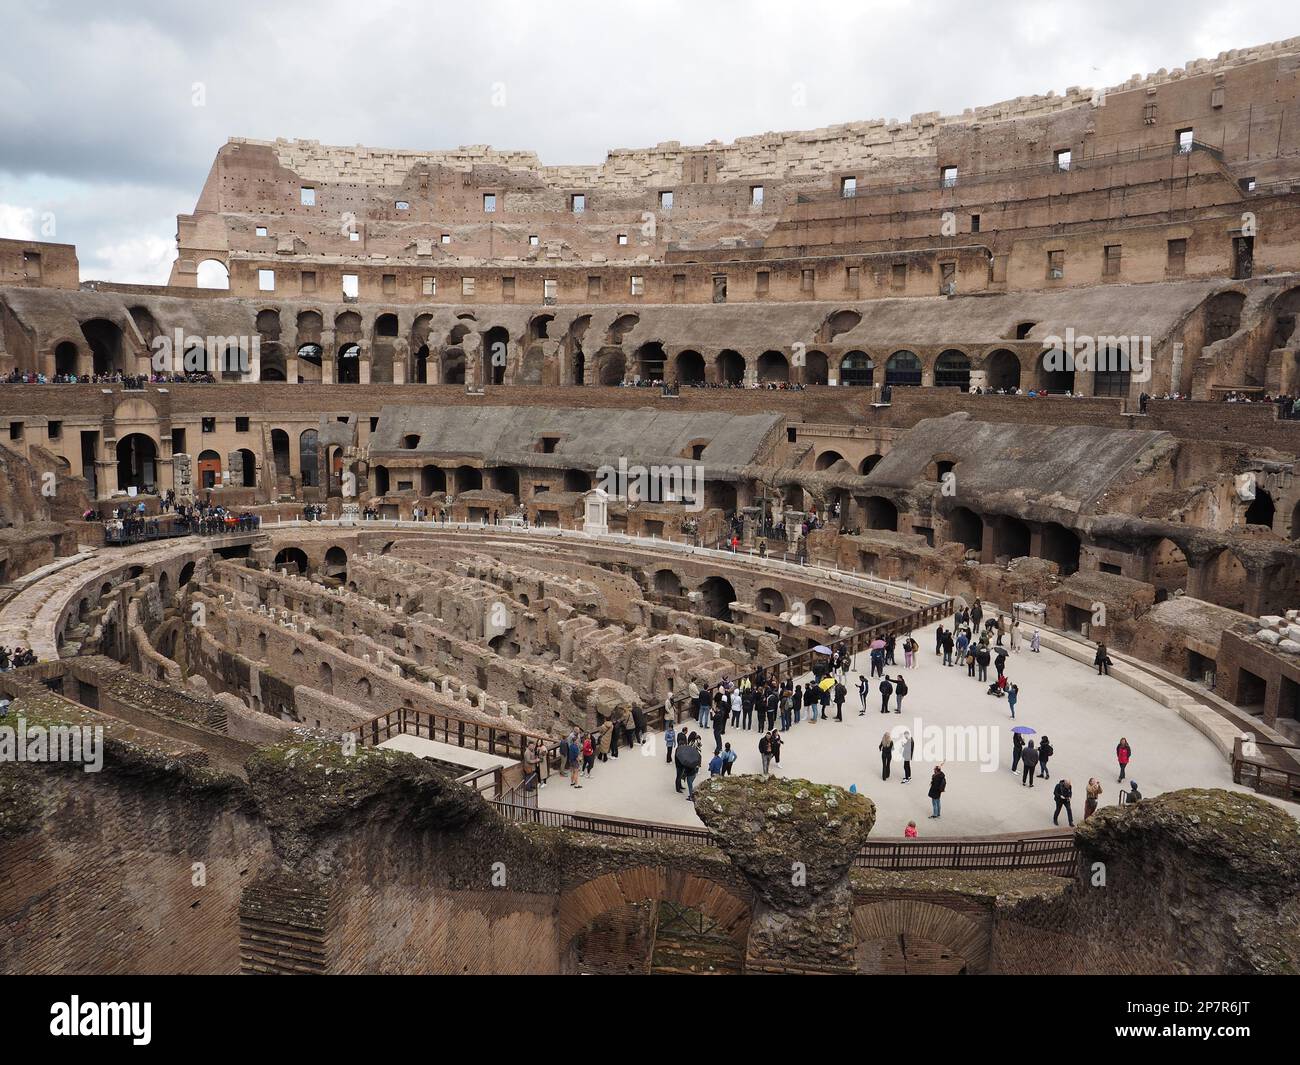 The Colosseum is one of the main tourist attractions in Rome, Italy. This shot of the inside shows the structures under the arena floor, and many visi Stock Photo